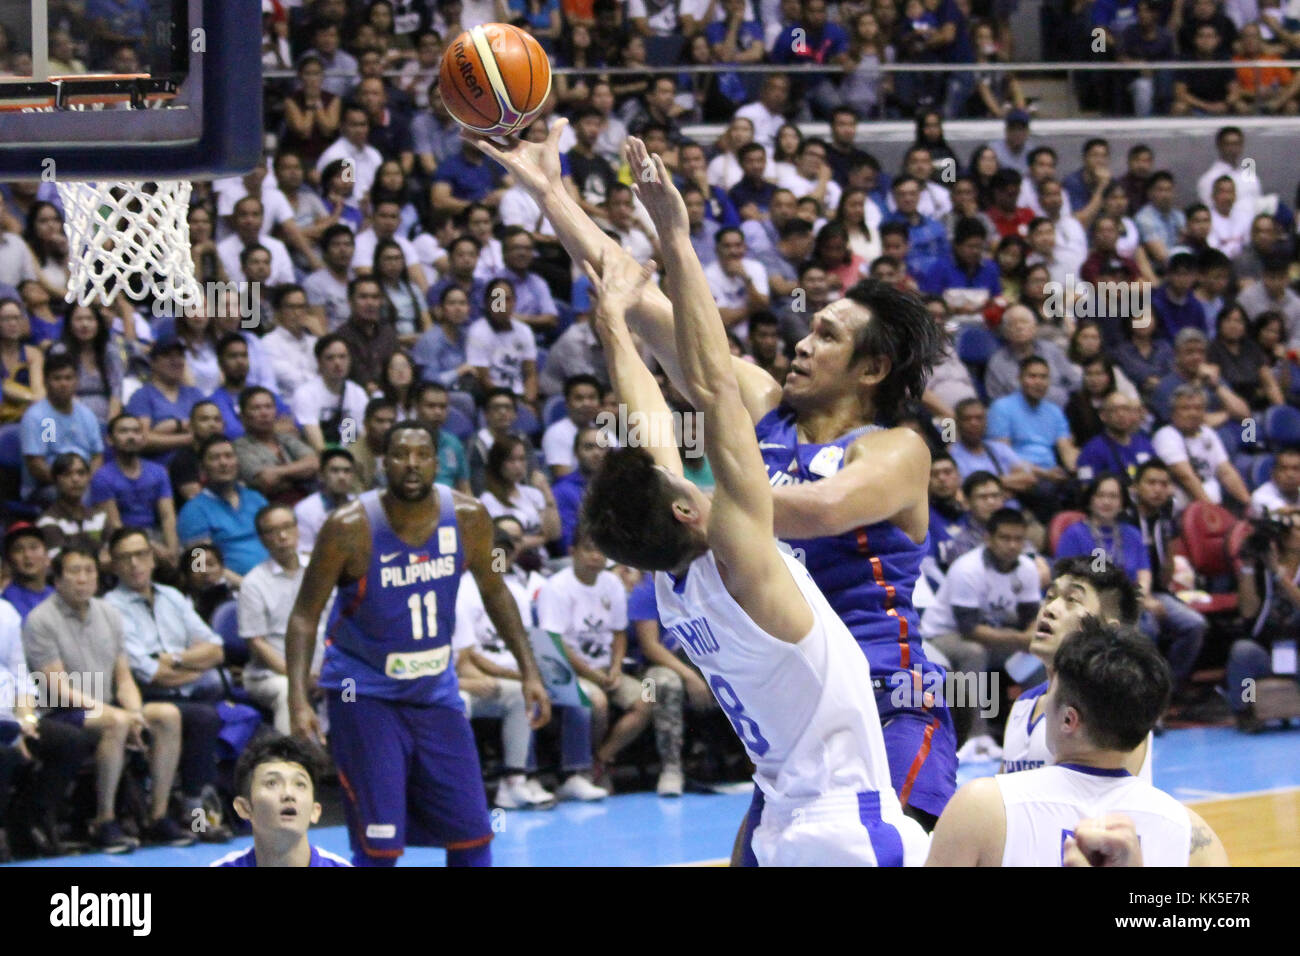 Quezon City, Philippines. 27th Nov, 2017. Junemar Fajardo (15) of the Philippines lays-up the ball over Po-Chen Chou (8) of Chinese Taipei to convert an uncontested lay-up during their FIBA World Cup Qualifying Match. Gilas Pilipinas defeated the visiting Chinese Taipei team 90-83 to complete a sweep of their first two assignments in the FIBA 2019 World Cup qualifiers. Credit: Dennis Jerome Acosta/ Pacific Press/Alamy Live News Stock Photo